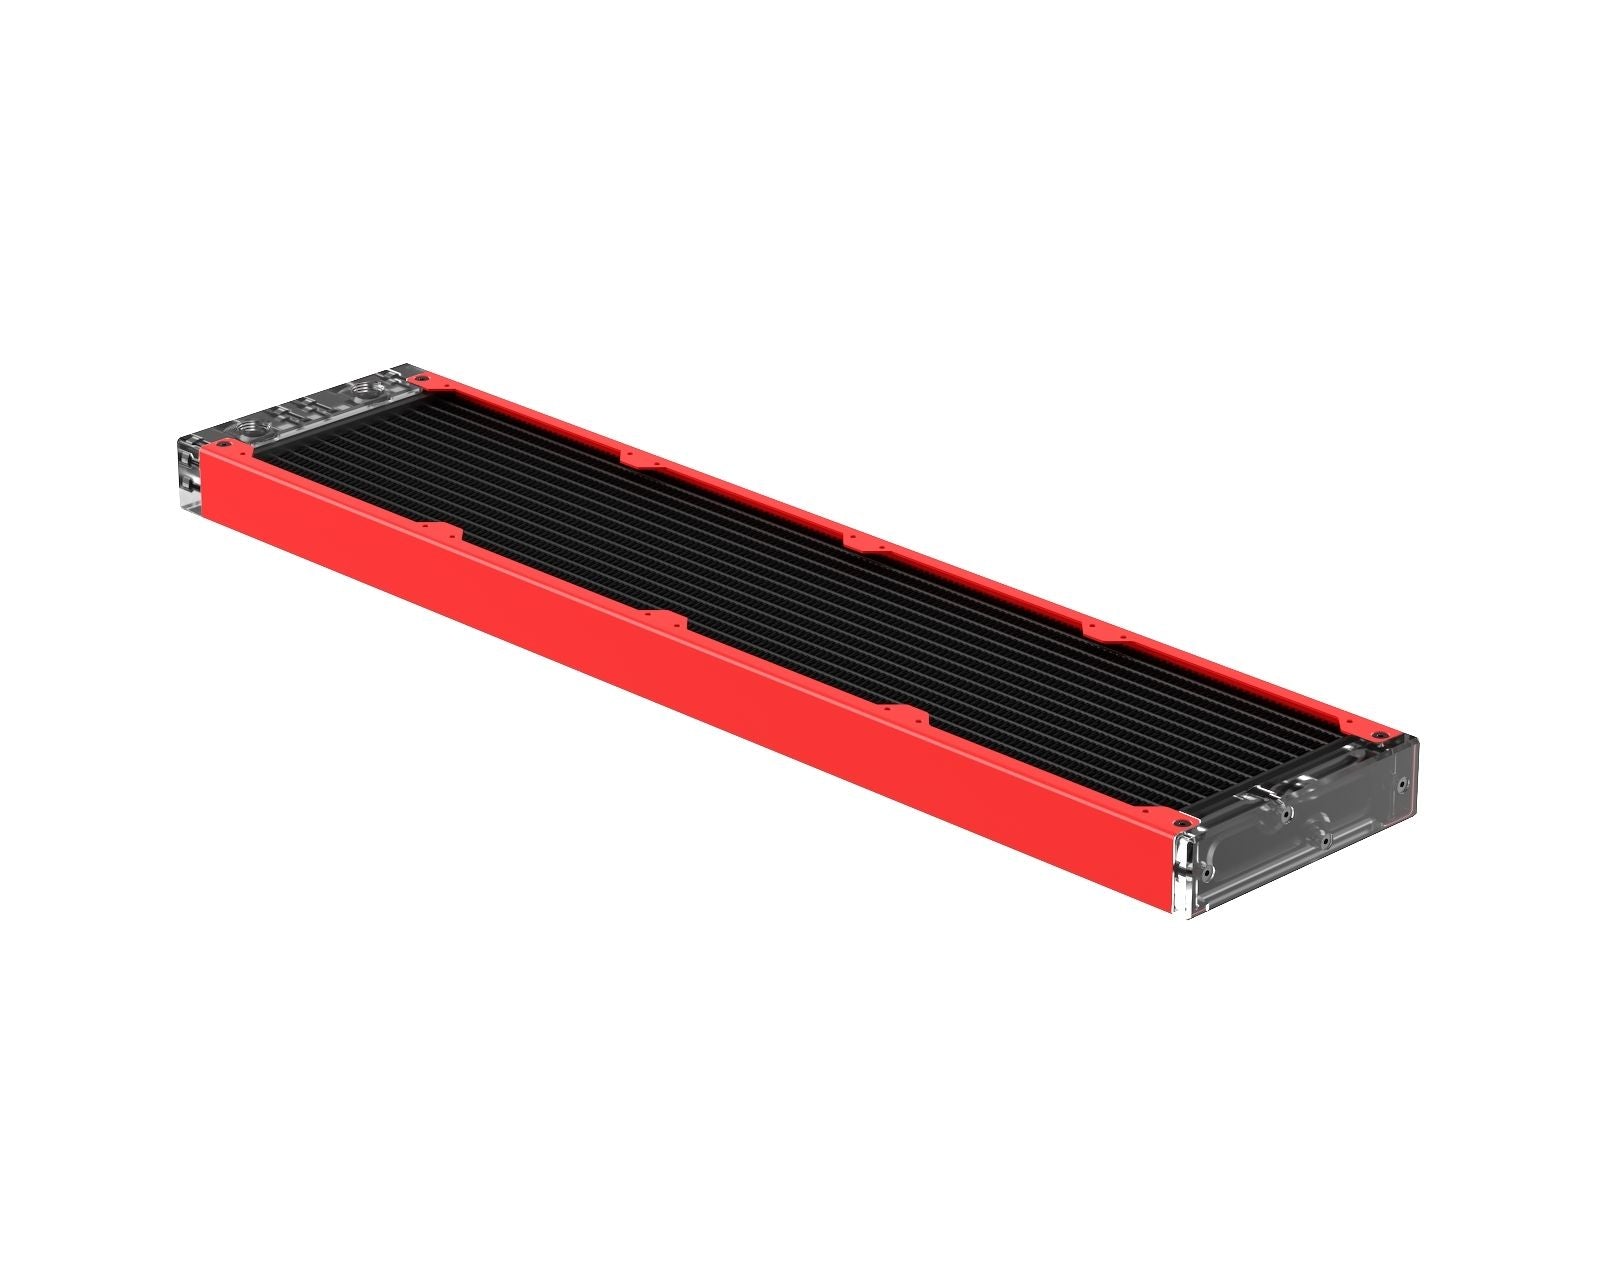 PrimoChill 480SL (30mm) EXIMO Modular Radiator, Clear Acrylic, 4x120mm, Quad Fan (R-SL-A48) Available in 20+ Colors, Assembled in USA and Custom Watercooling Loop Ready - UV Red